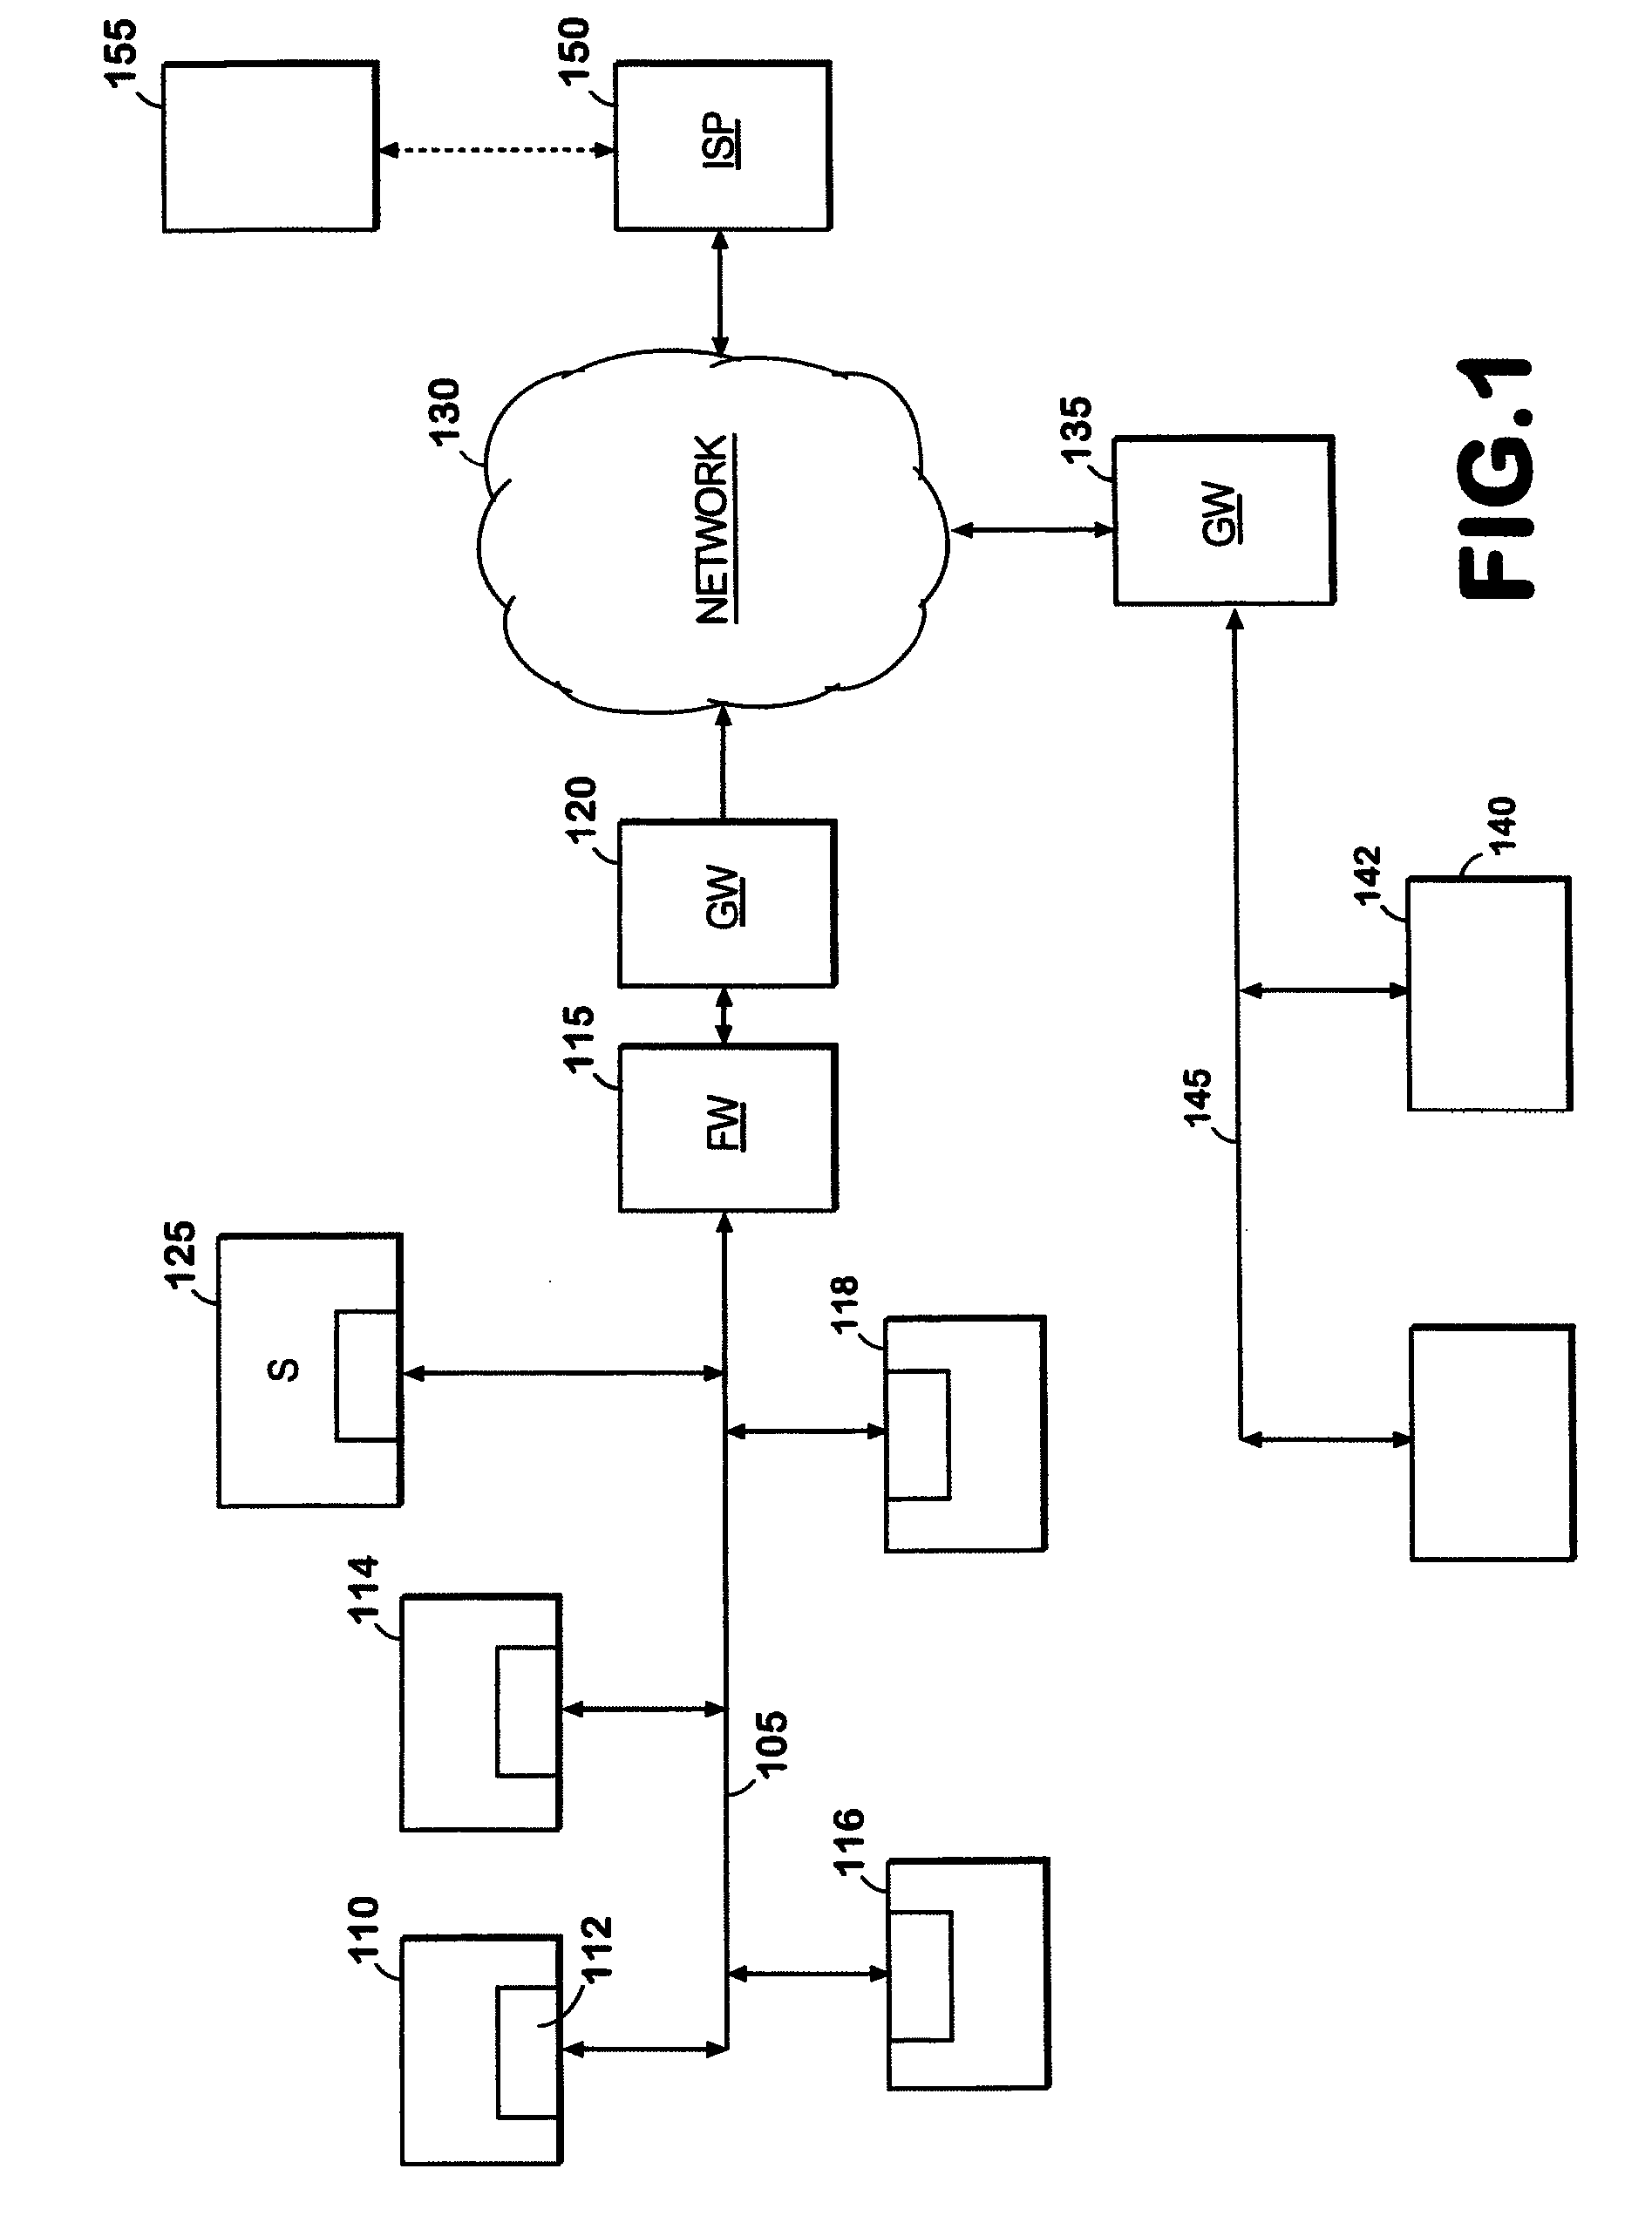 Method and apparatus for providing network and computer system security